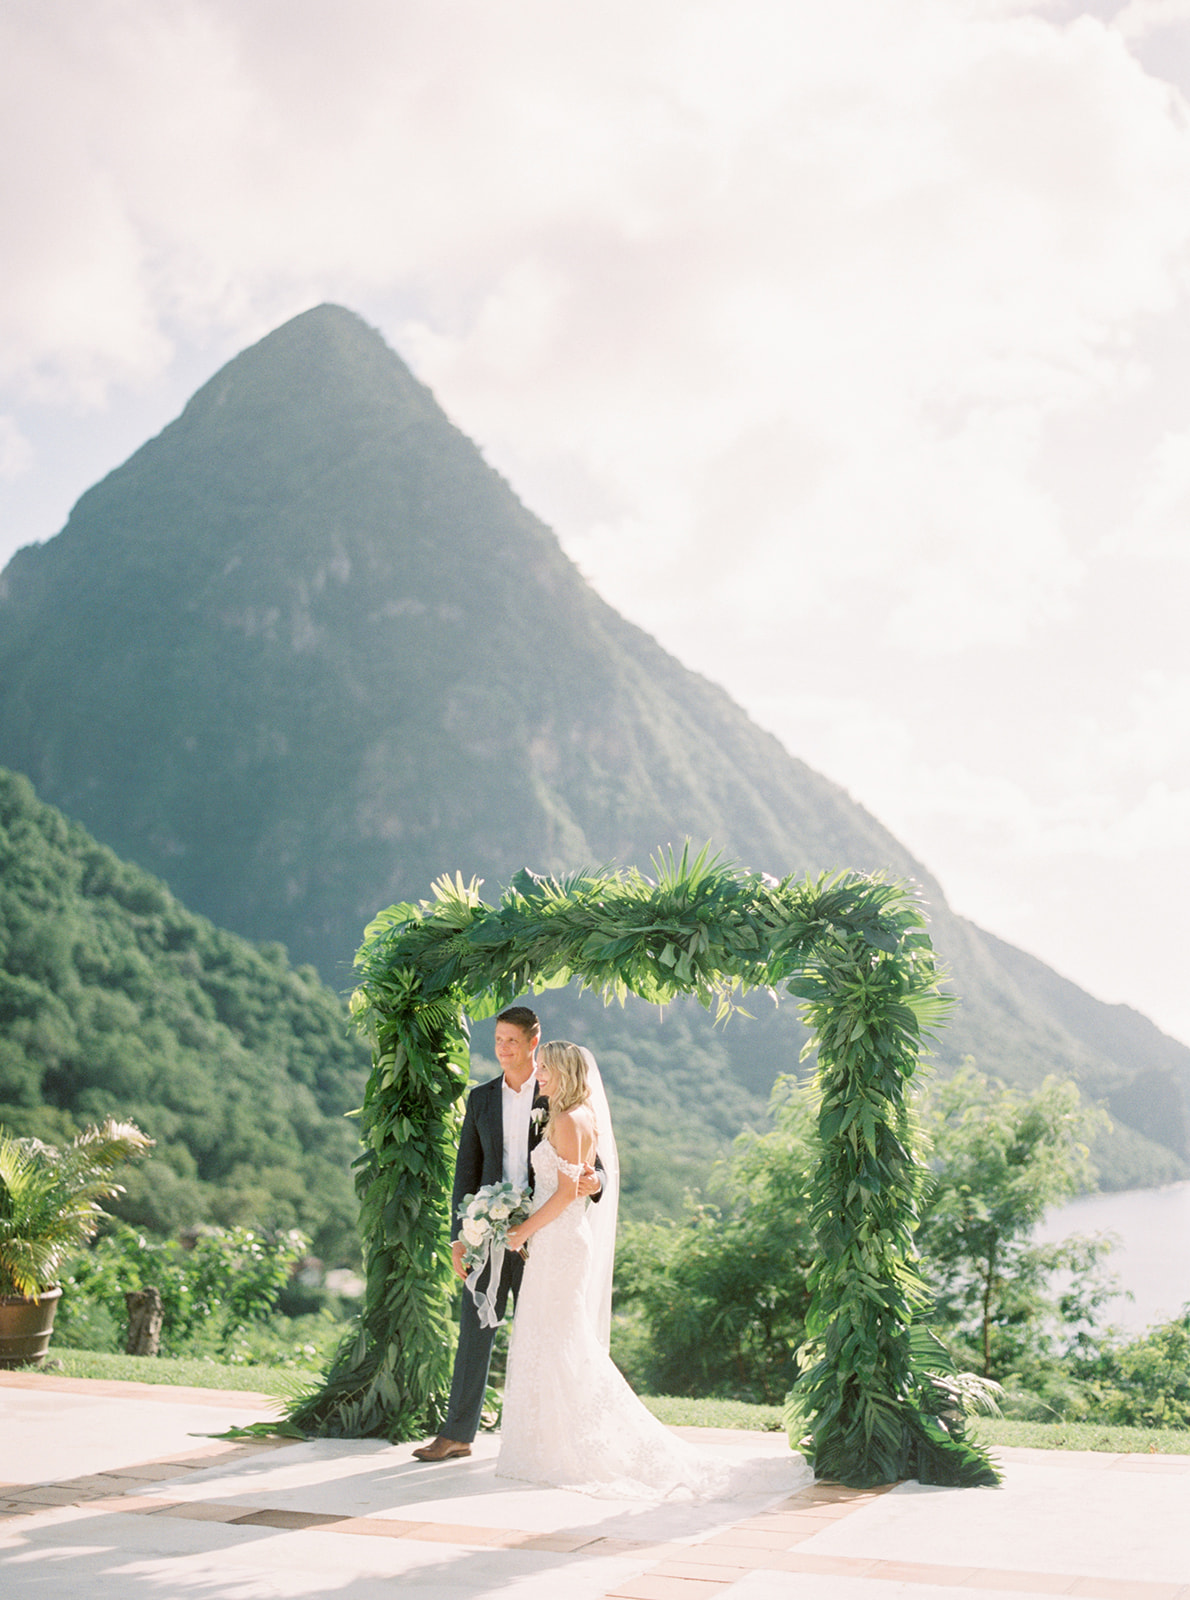 A wedding ceremony with views of the Pitons in St. Lucia